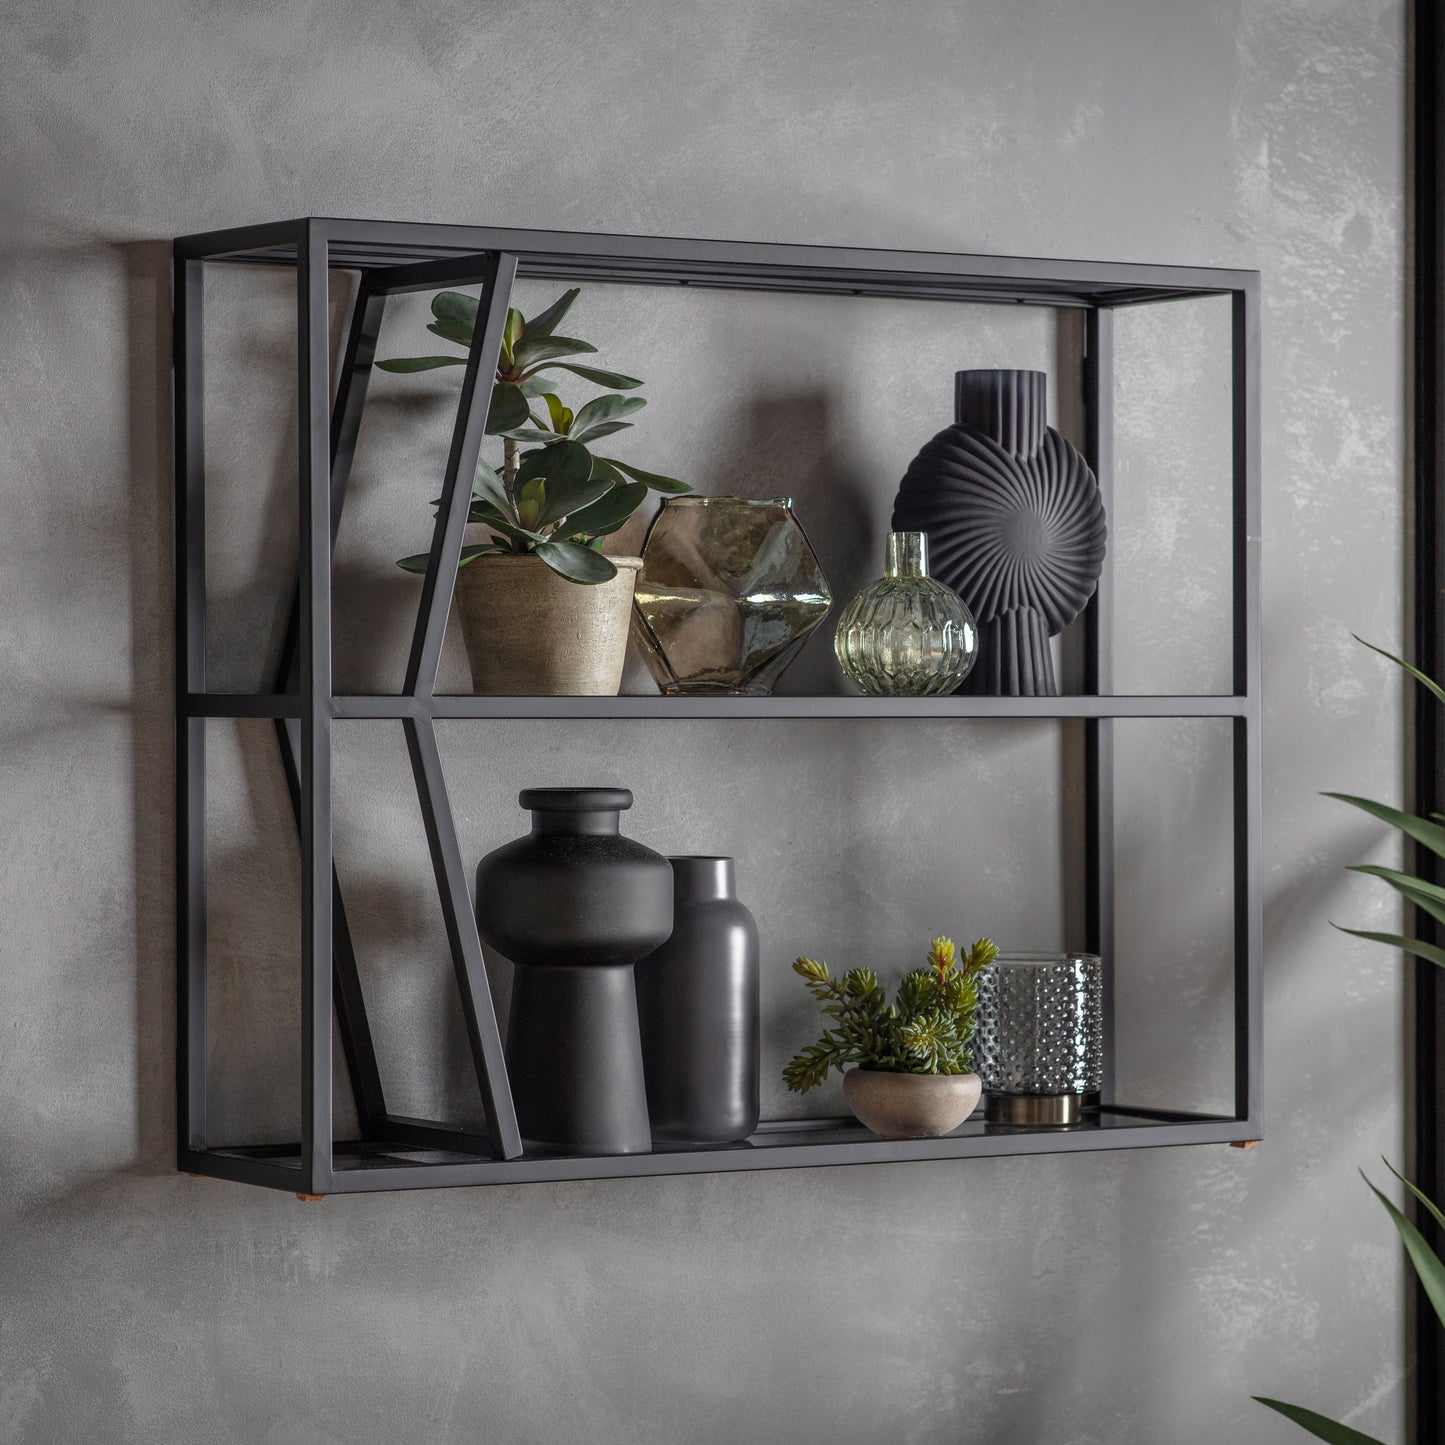 A stylish Putney shelf unit adorned with plants and pots, perfect for enhancing home furniture and interior decor.